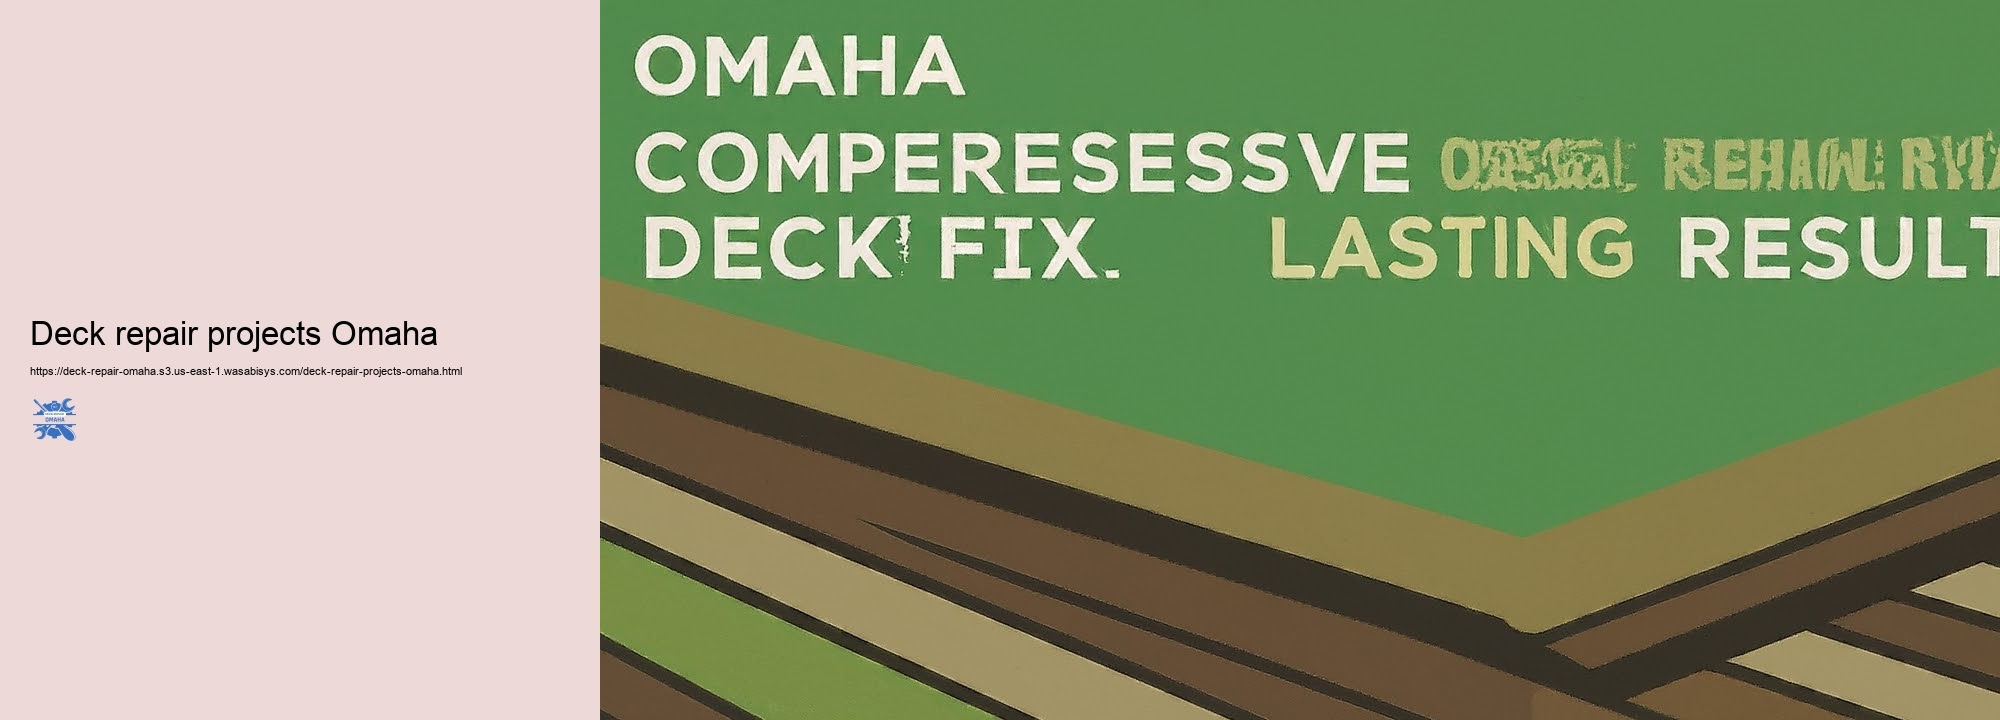 Affordable Deck Repair Service Solutions for Omaha Residents